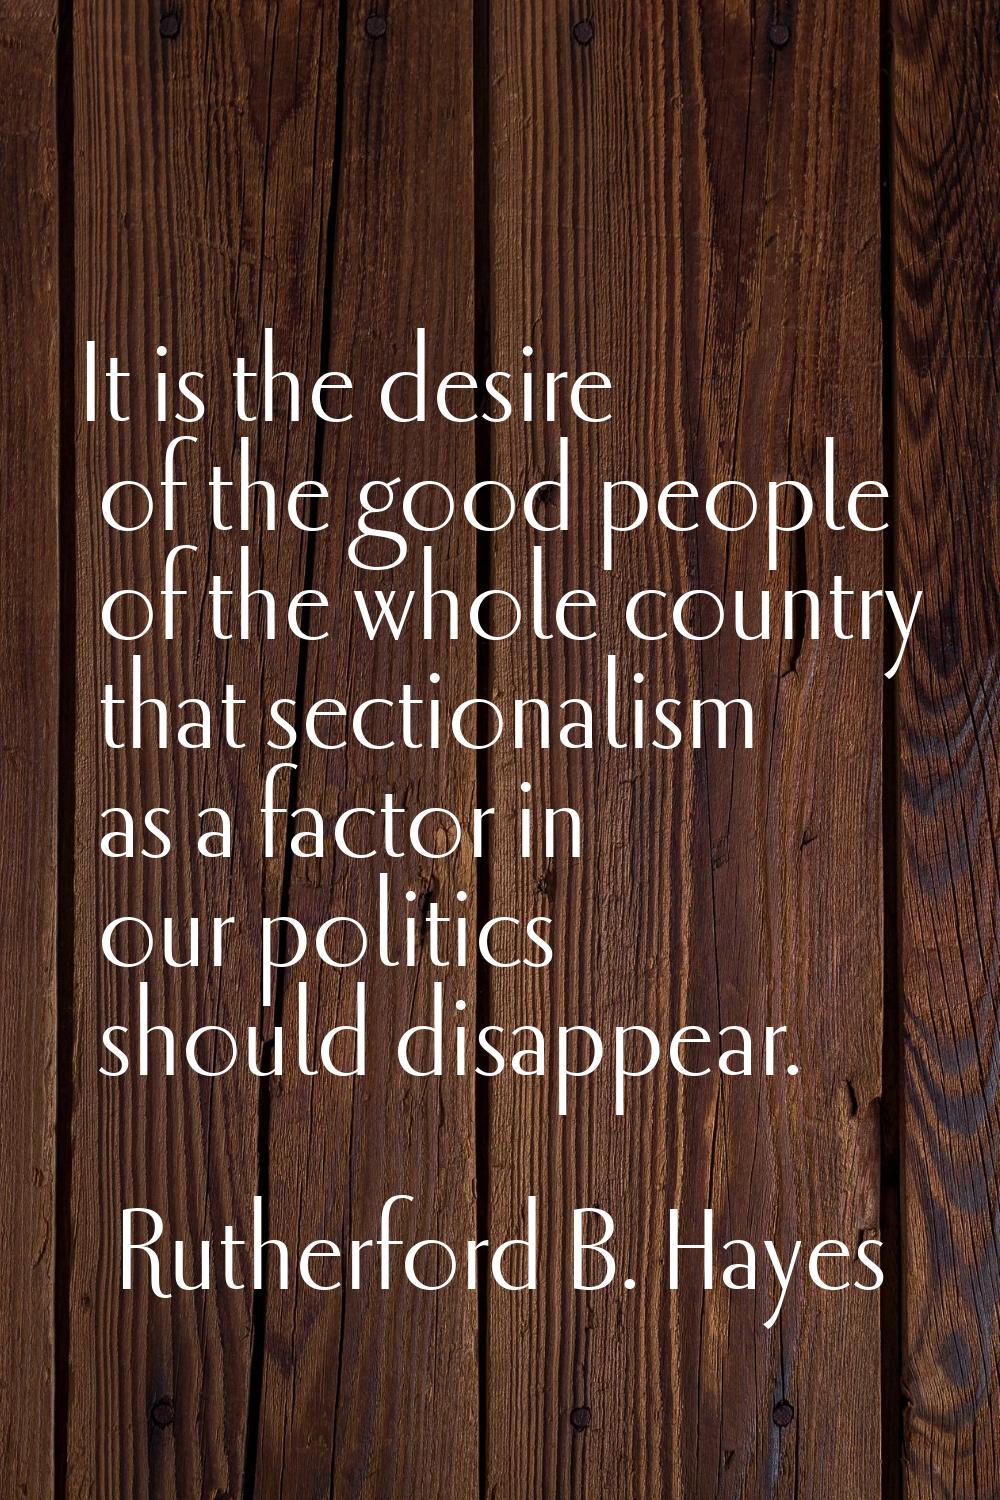 It is the desire of the good people of the whole country that sectionalism as a factor in our polit